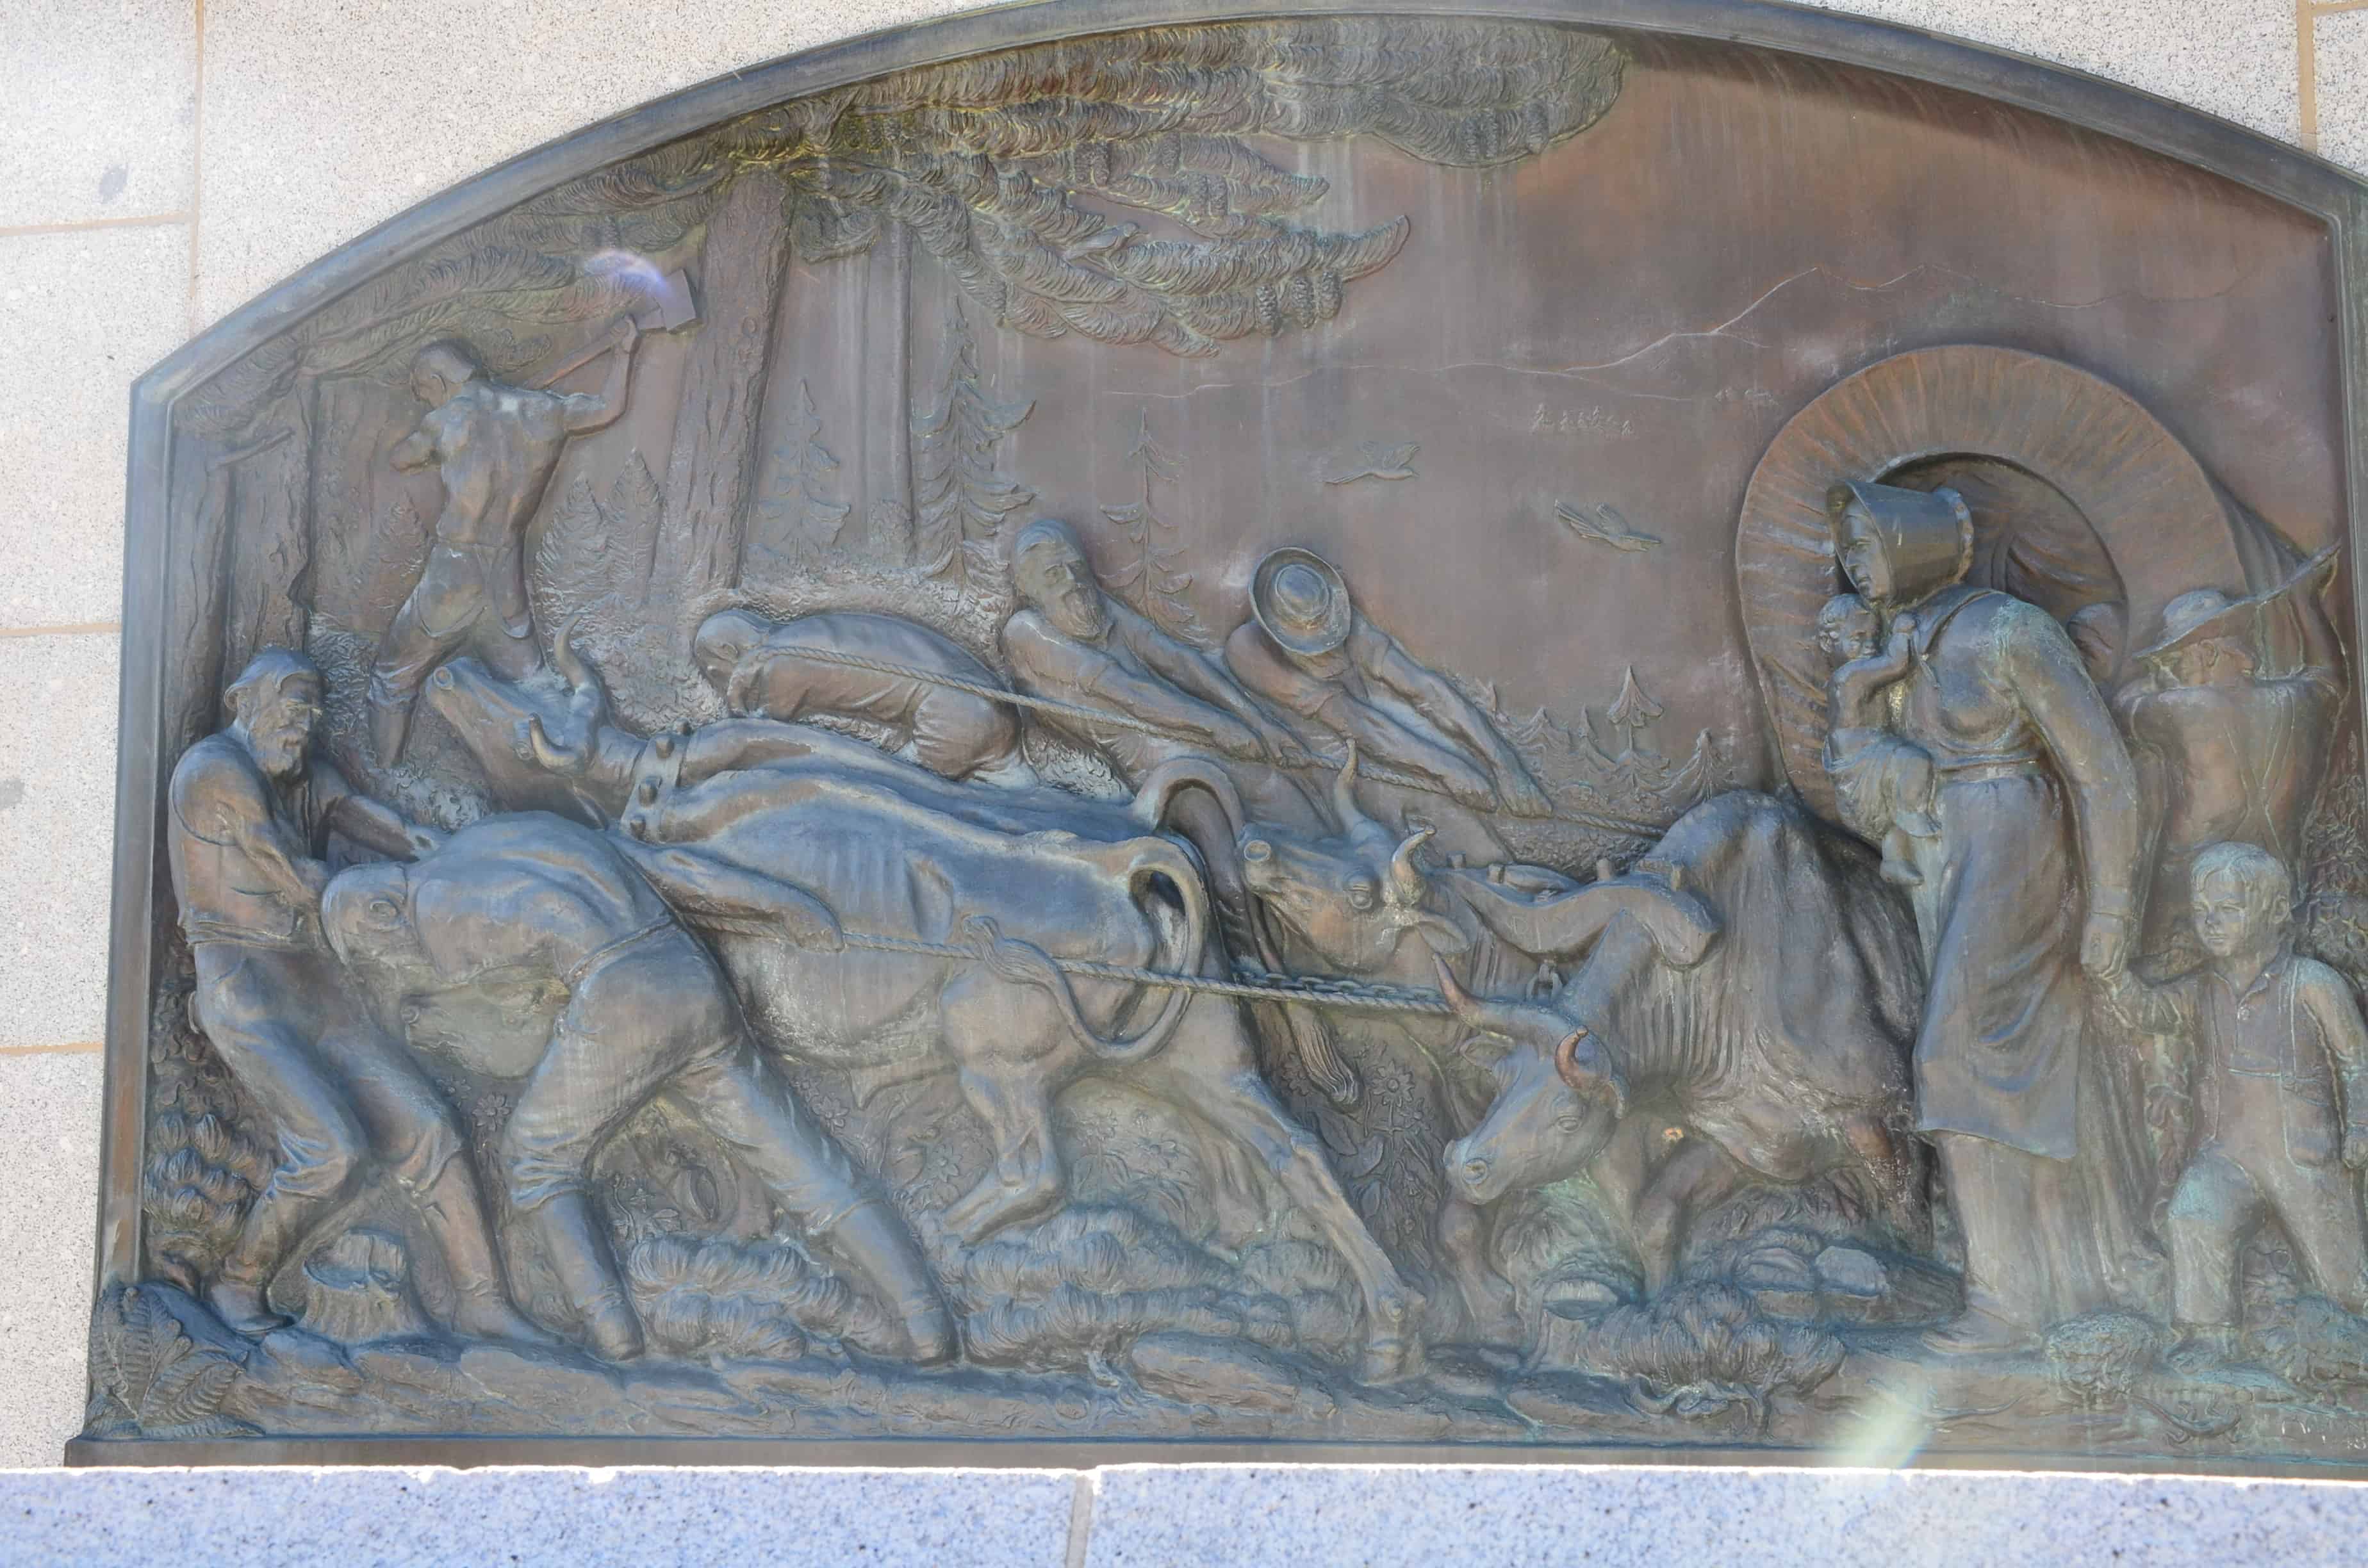 Donner Party on the This Is the Place Monument in Salt Lake City, Utah